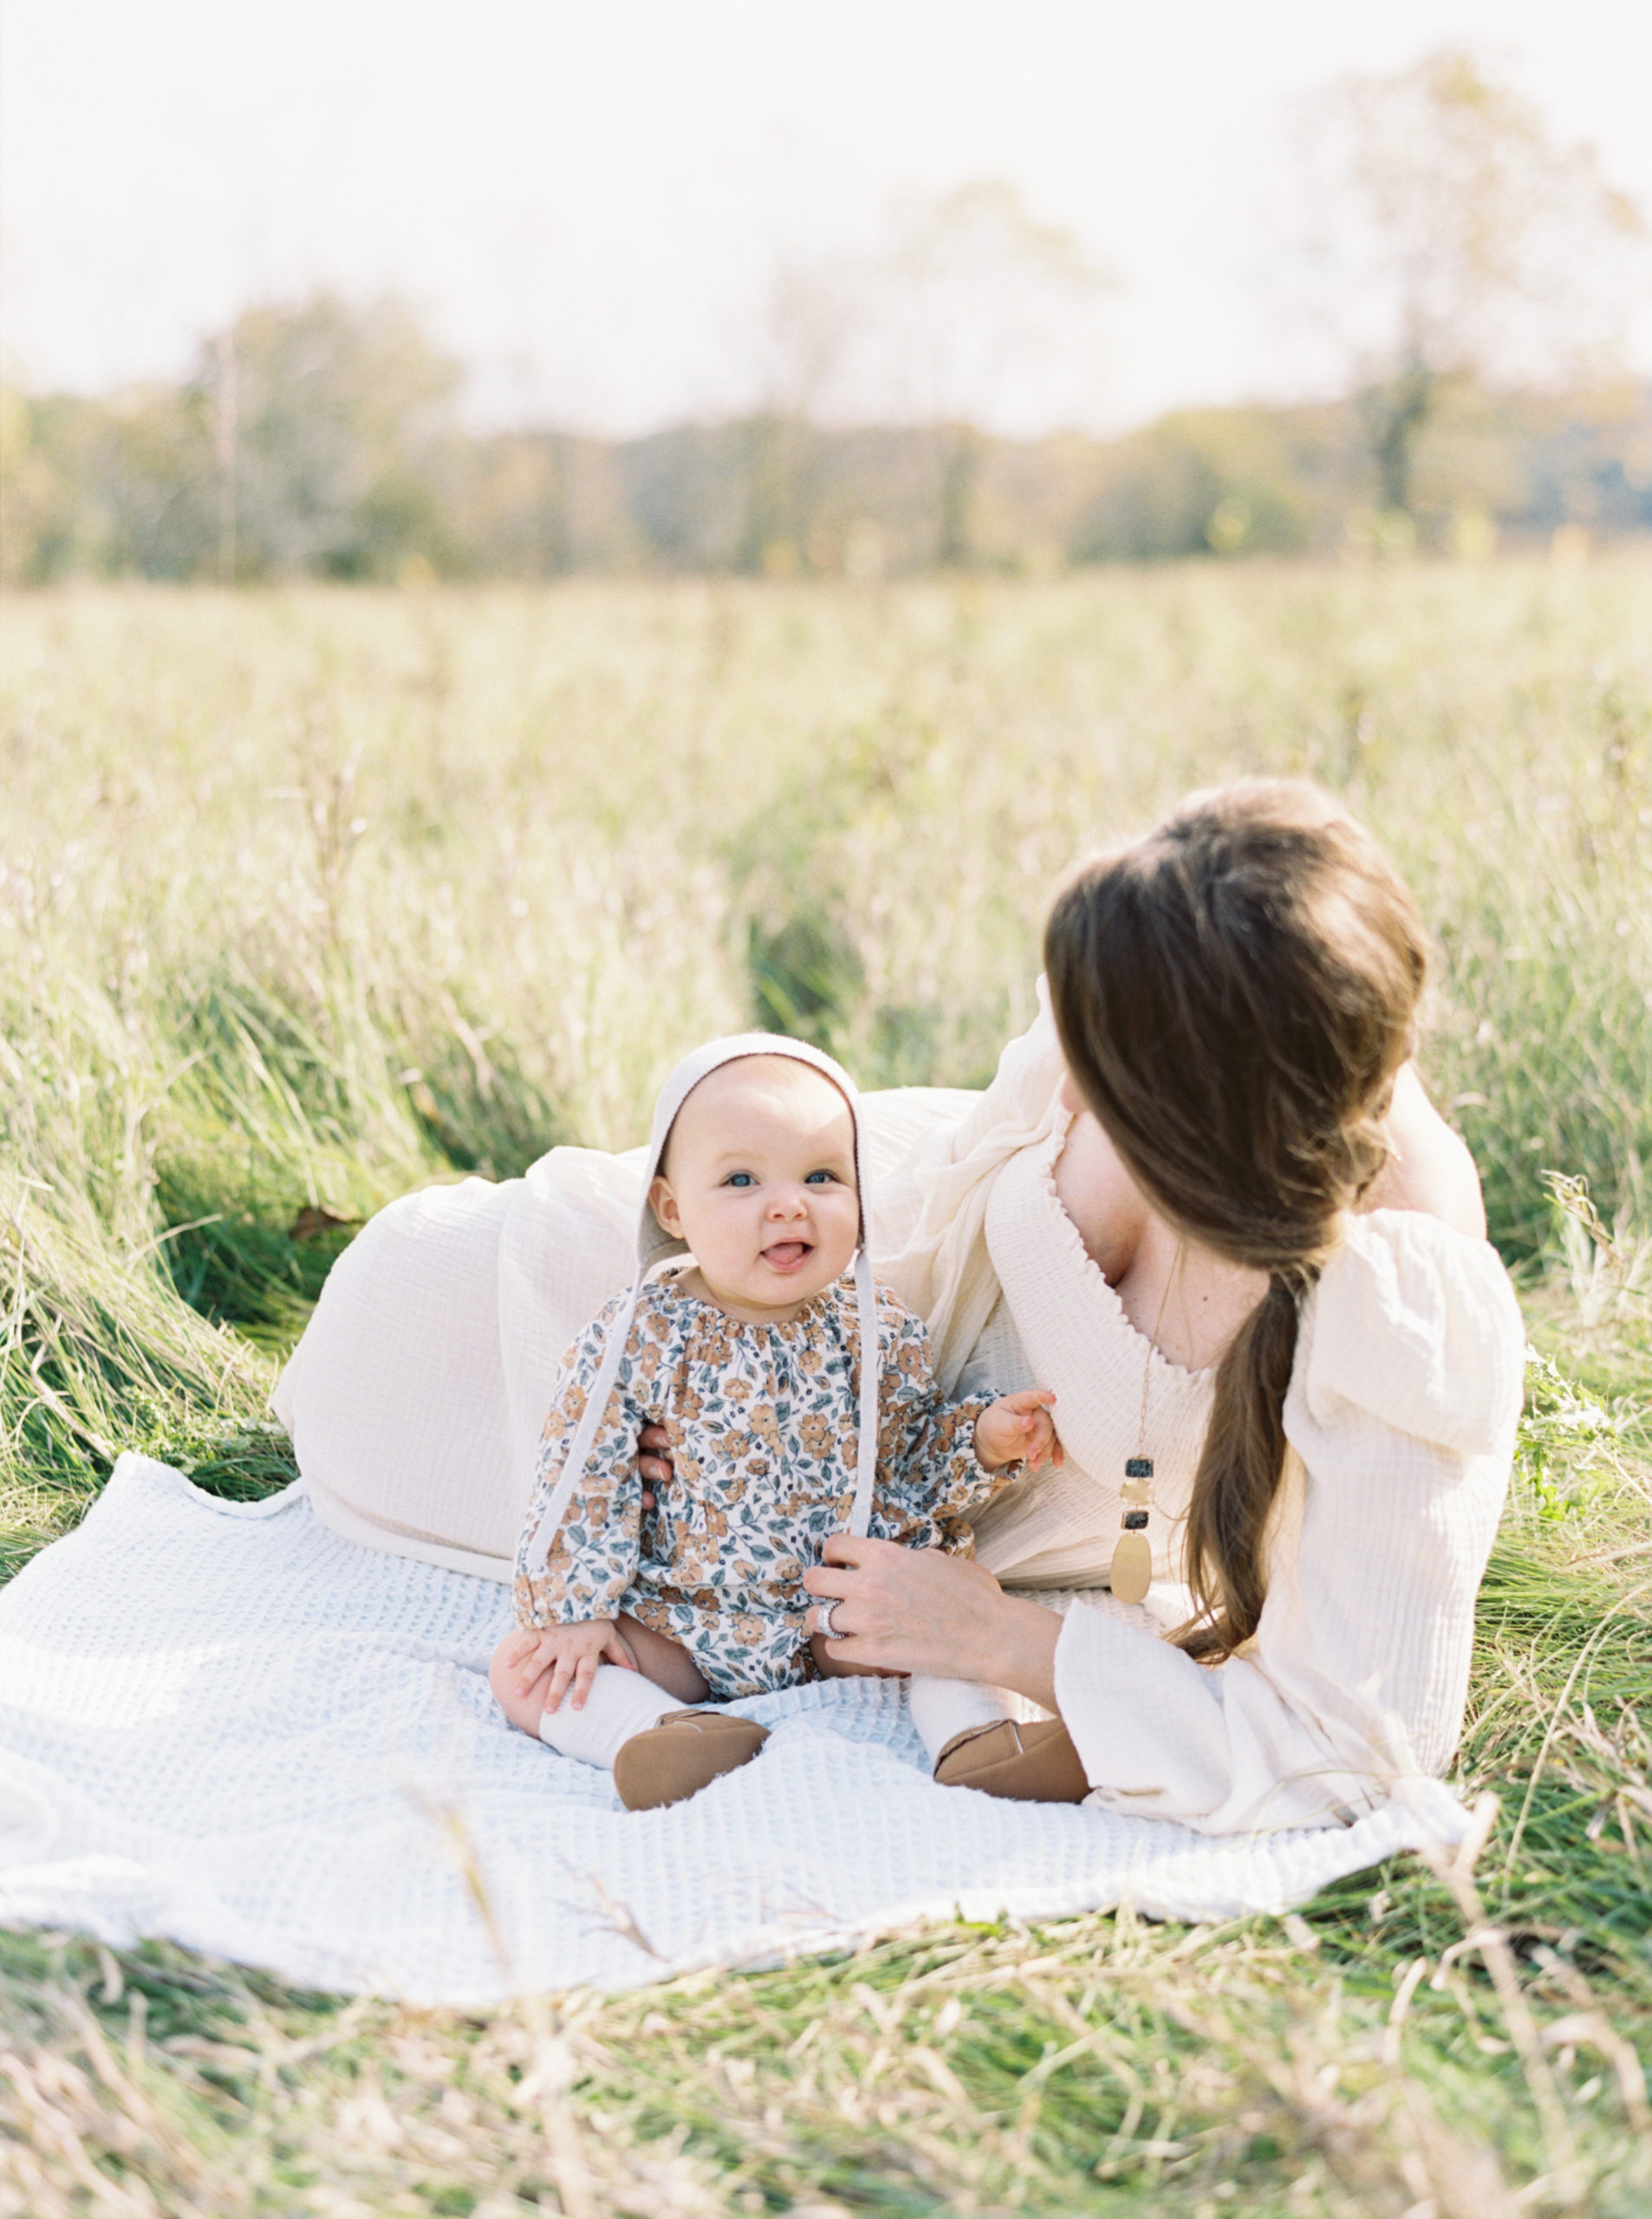 A Mother cuddles her baby in a grassy Hartland field on a beautiful Fall afternoon